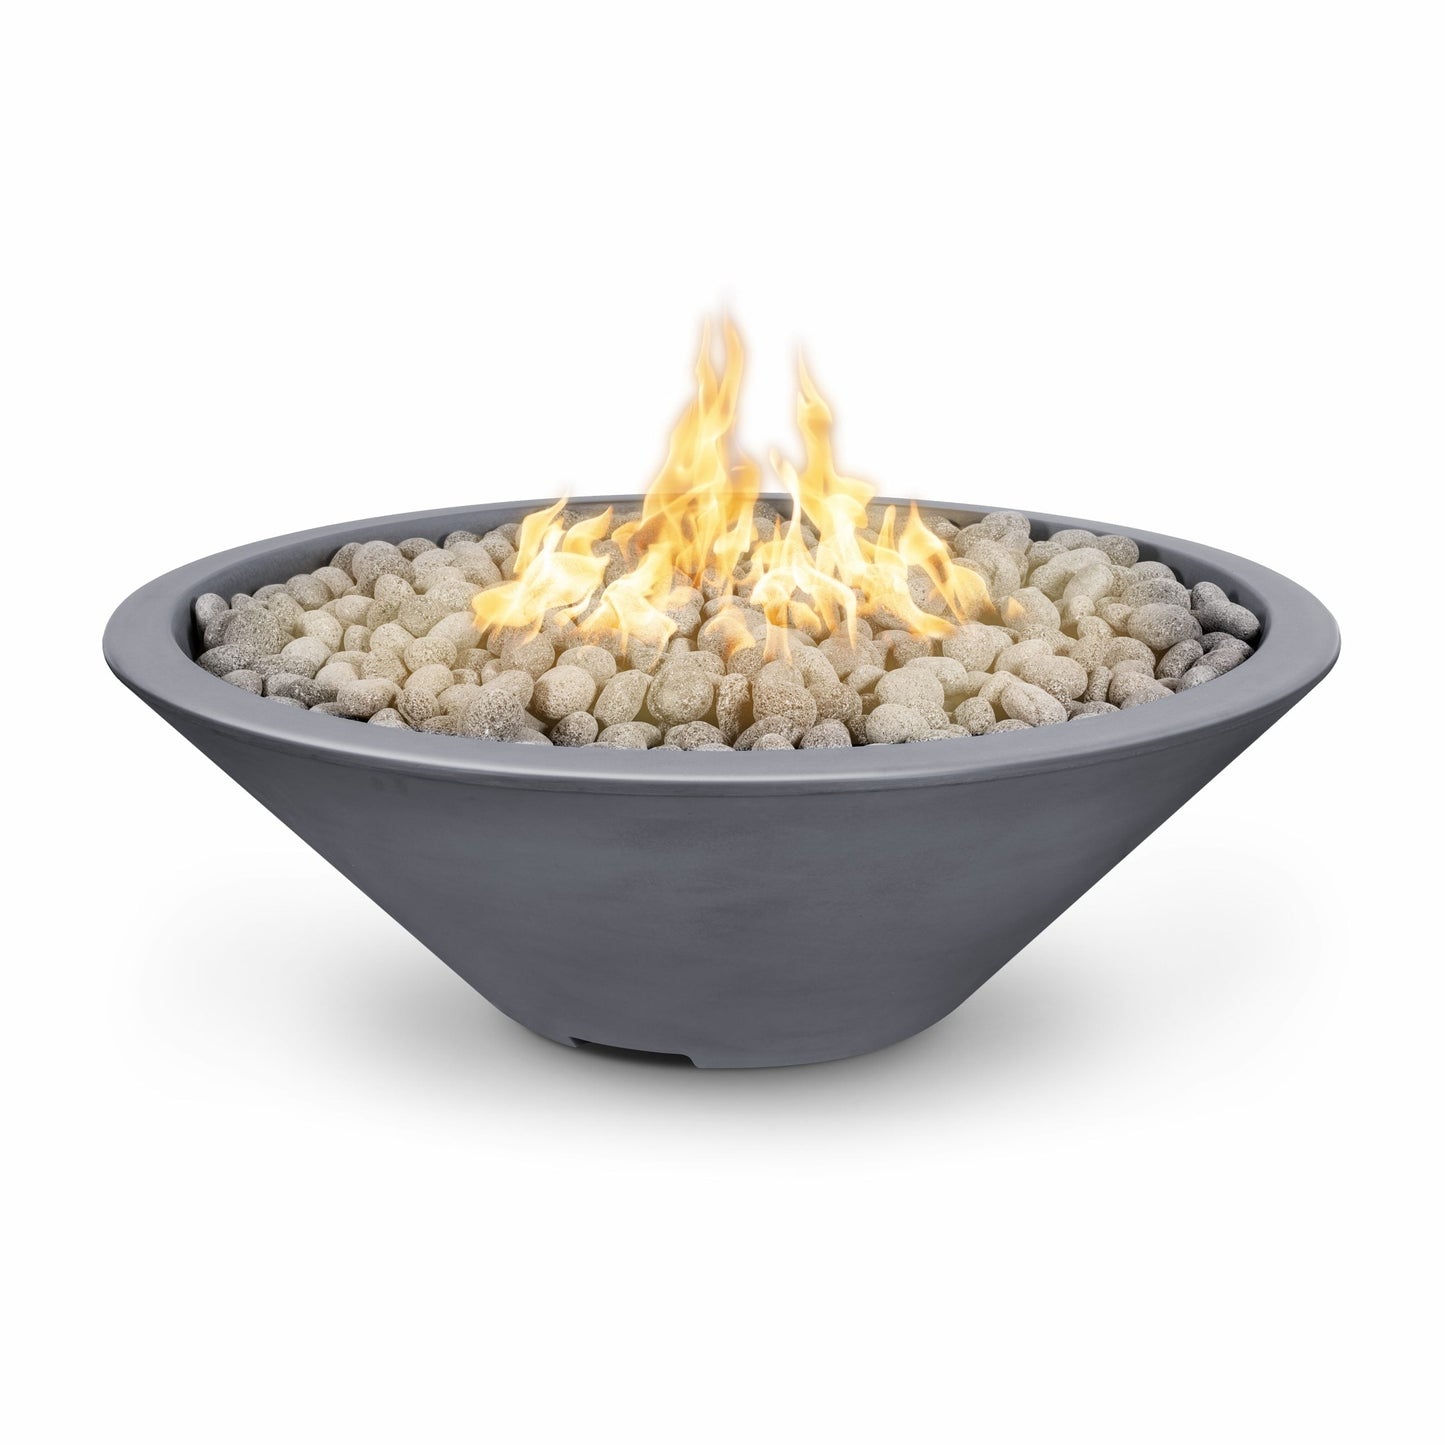 The Outdoor Plus Round Cazo 60" White Powder Coated Metal Liquid Propane Fire Pit with Match Lit Ignition